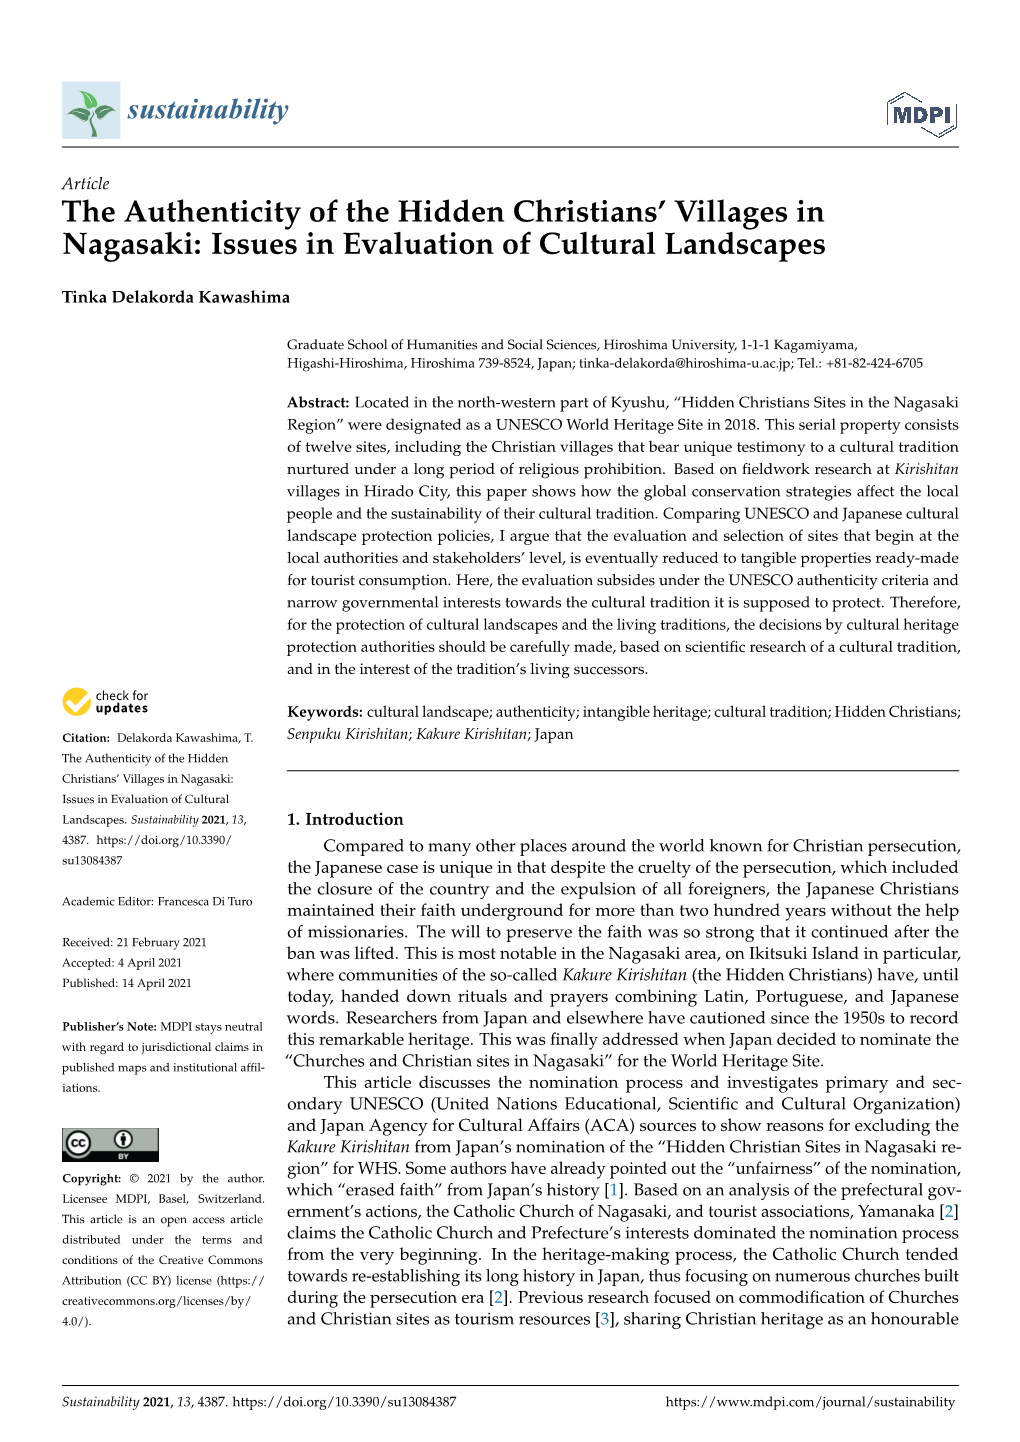 The Authenticity of the Hidden Christians' Villages in Nagasaki: Issues in Evaluation of Cultural Landscapes